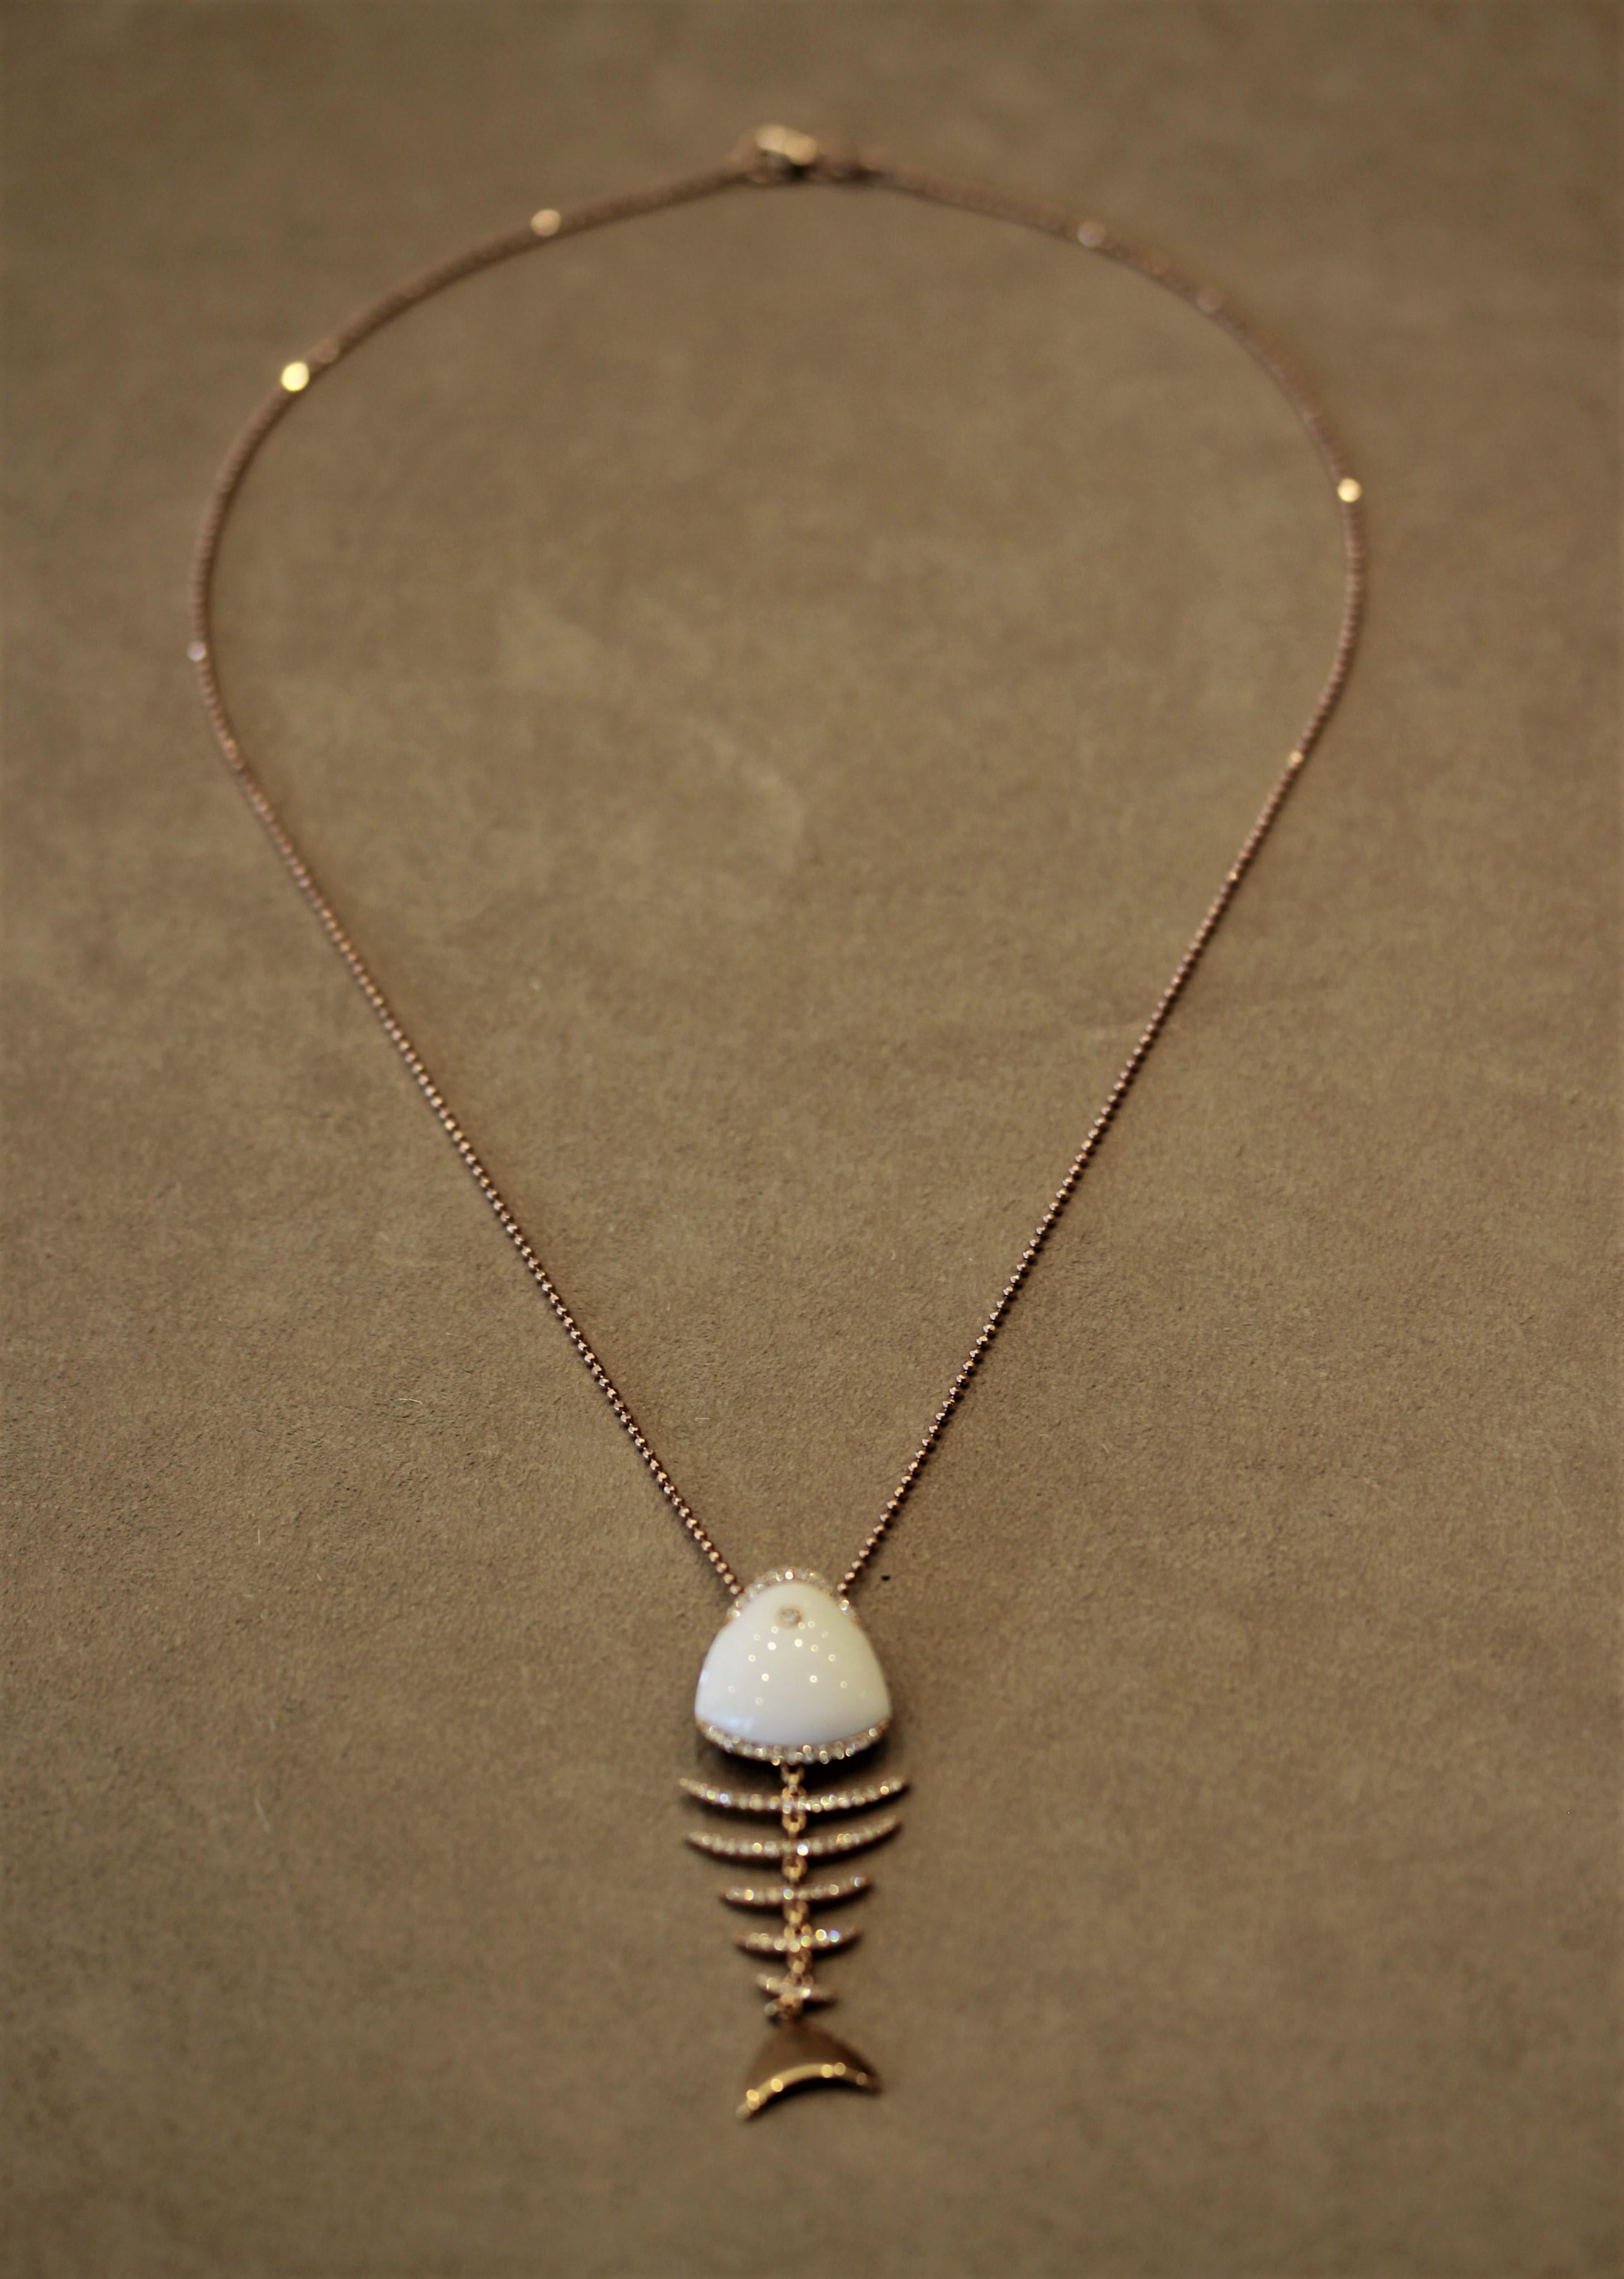 A unique fish-bone pendant featuring a piece of white onyx as the head and 1.00 carats of round brilliant cut diamonds set along the “bones” of the deceased fish. Each of the 18k rose gold bones are attached by independent links allowing them to be